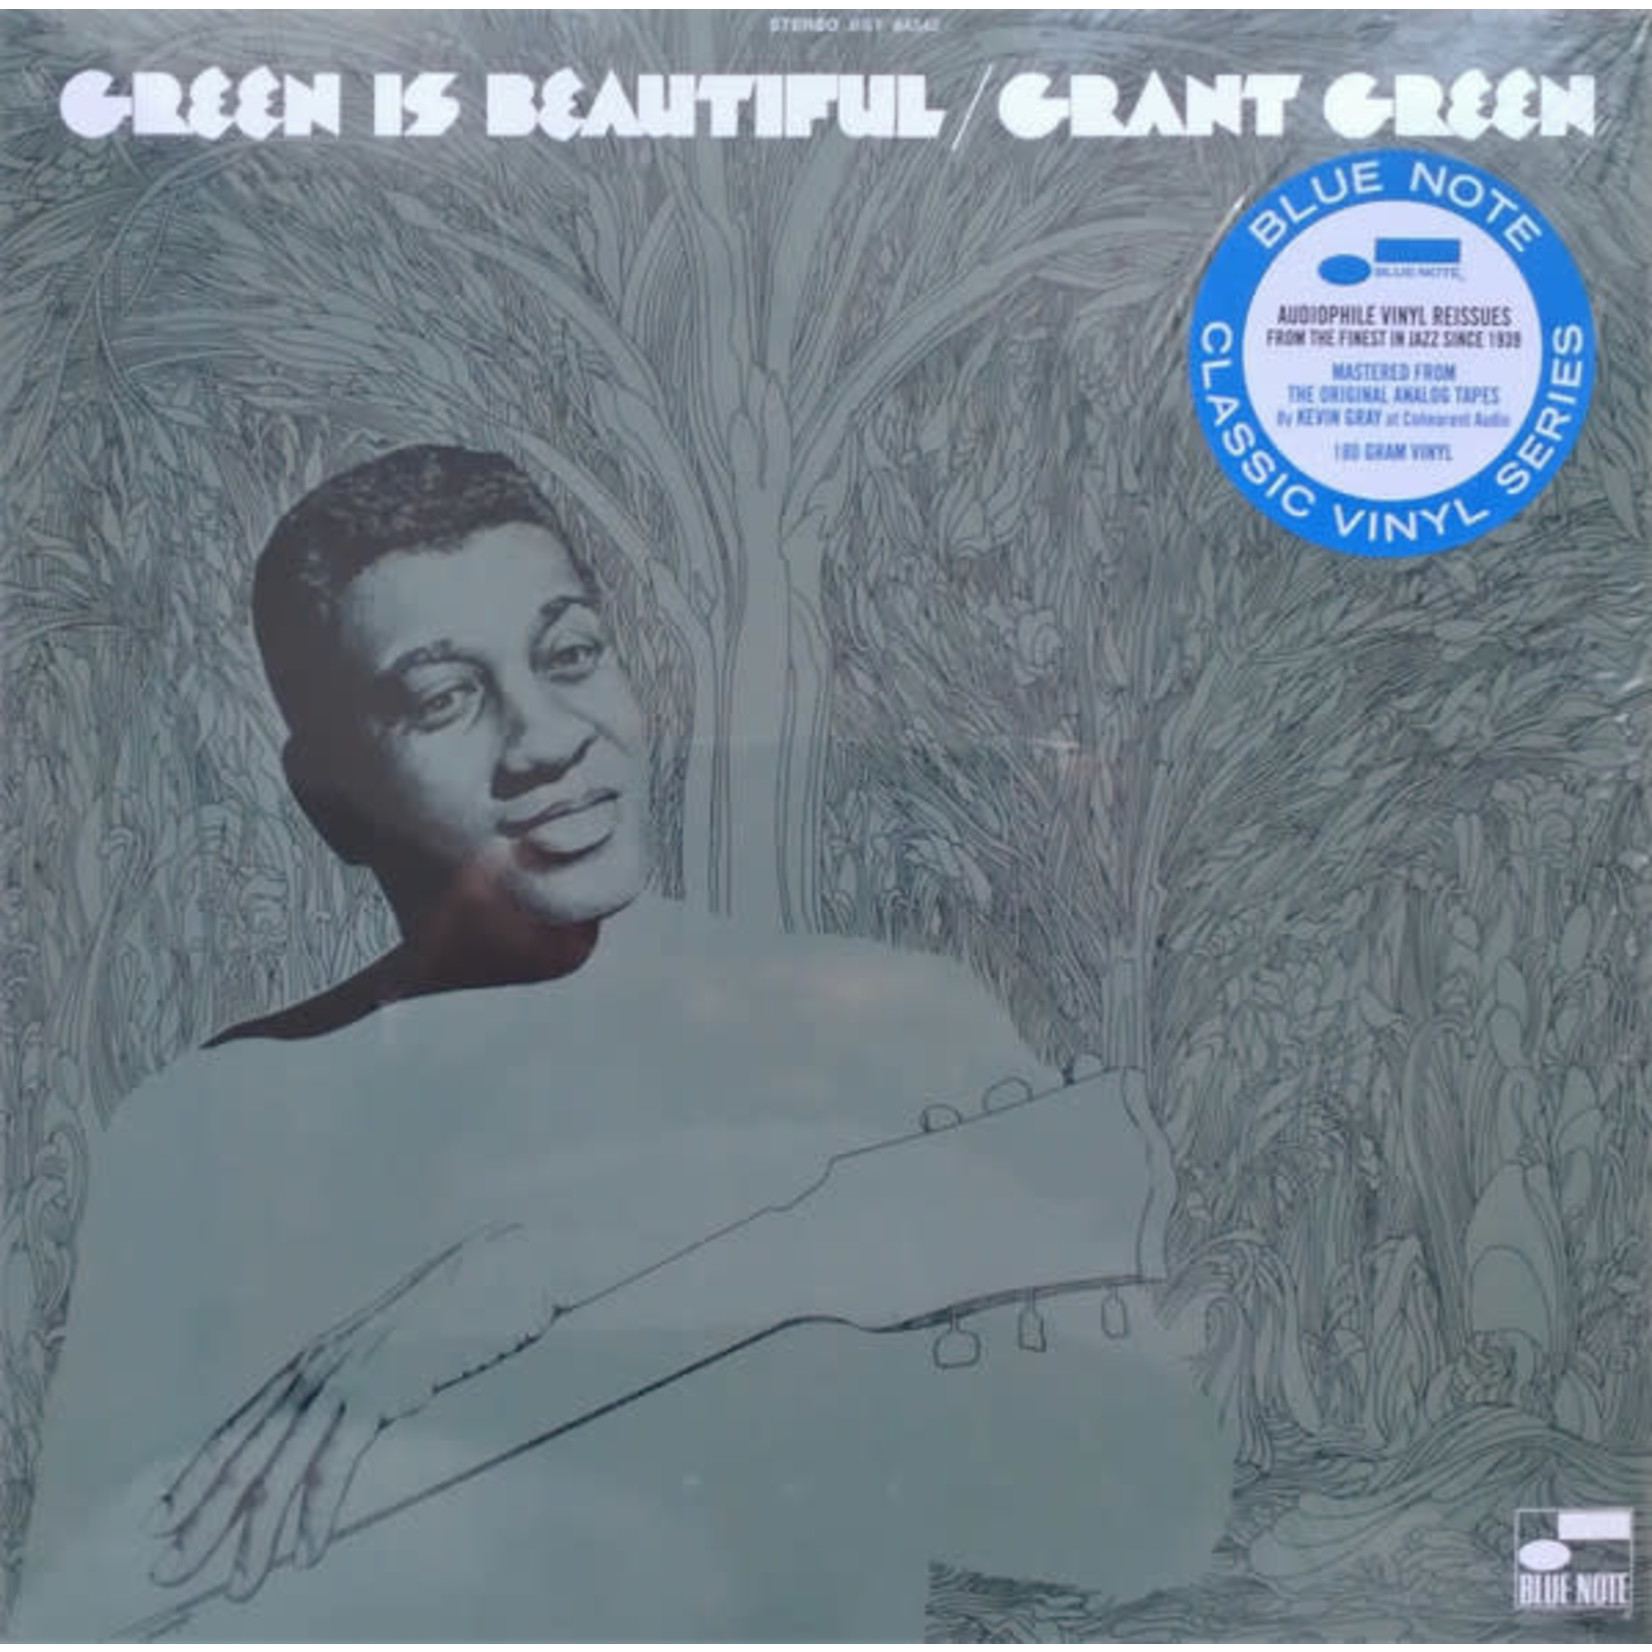 Blue Note Grant Green - Green Is Beautiful (LP)